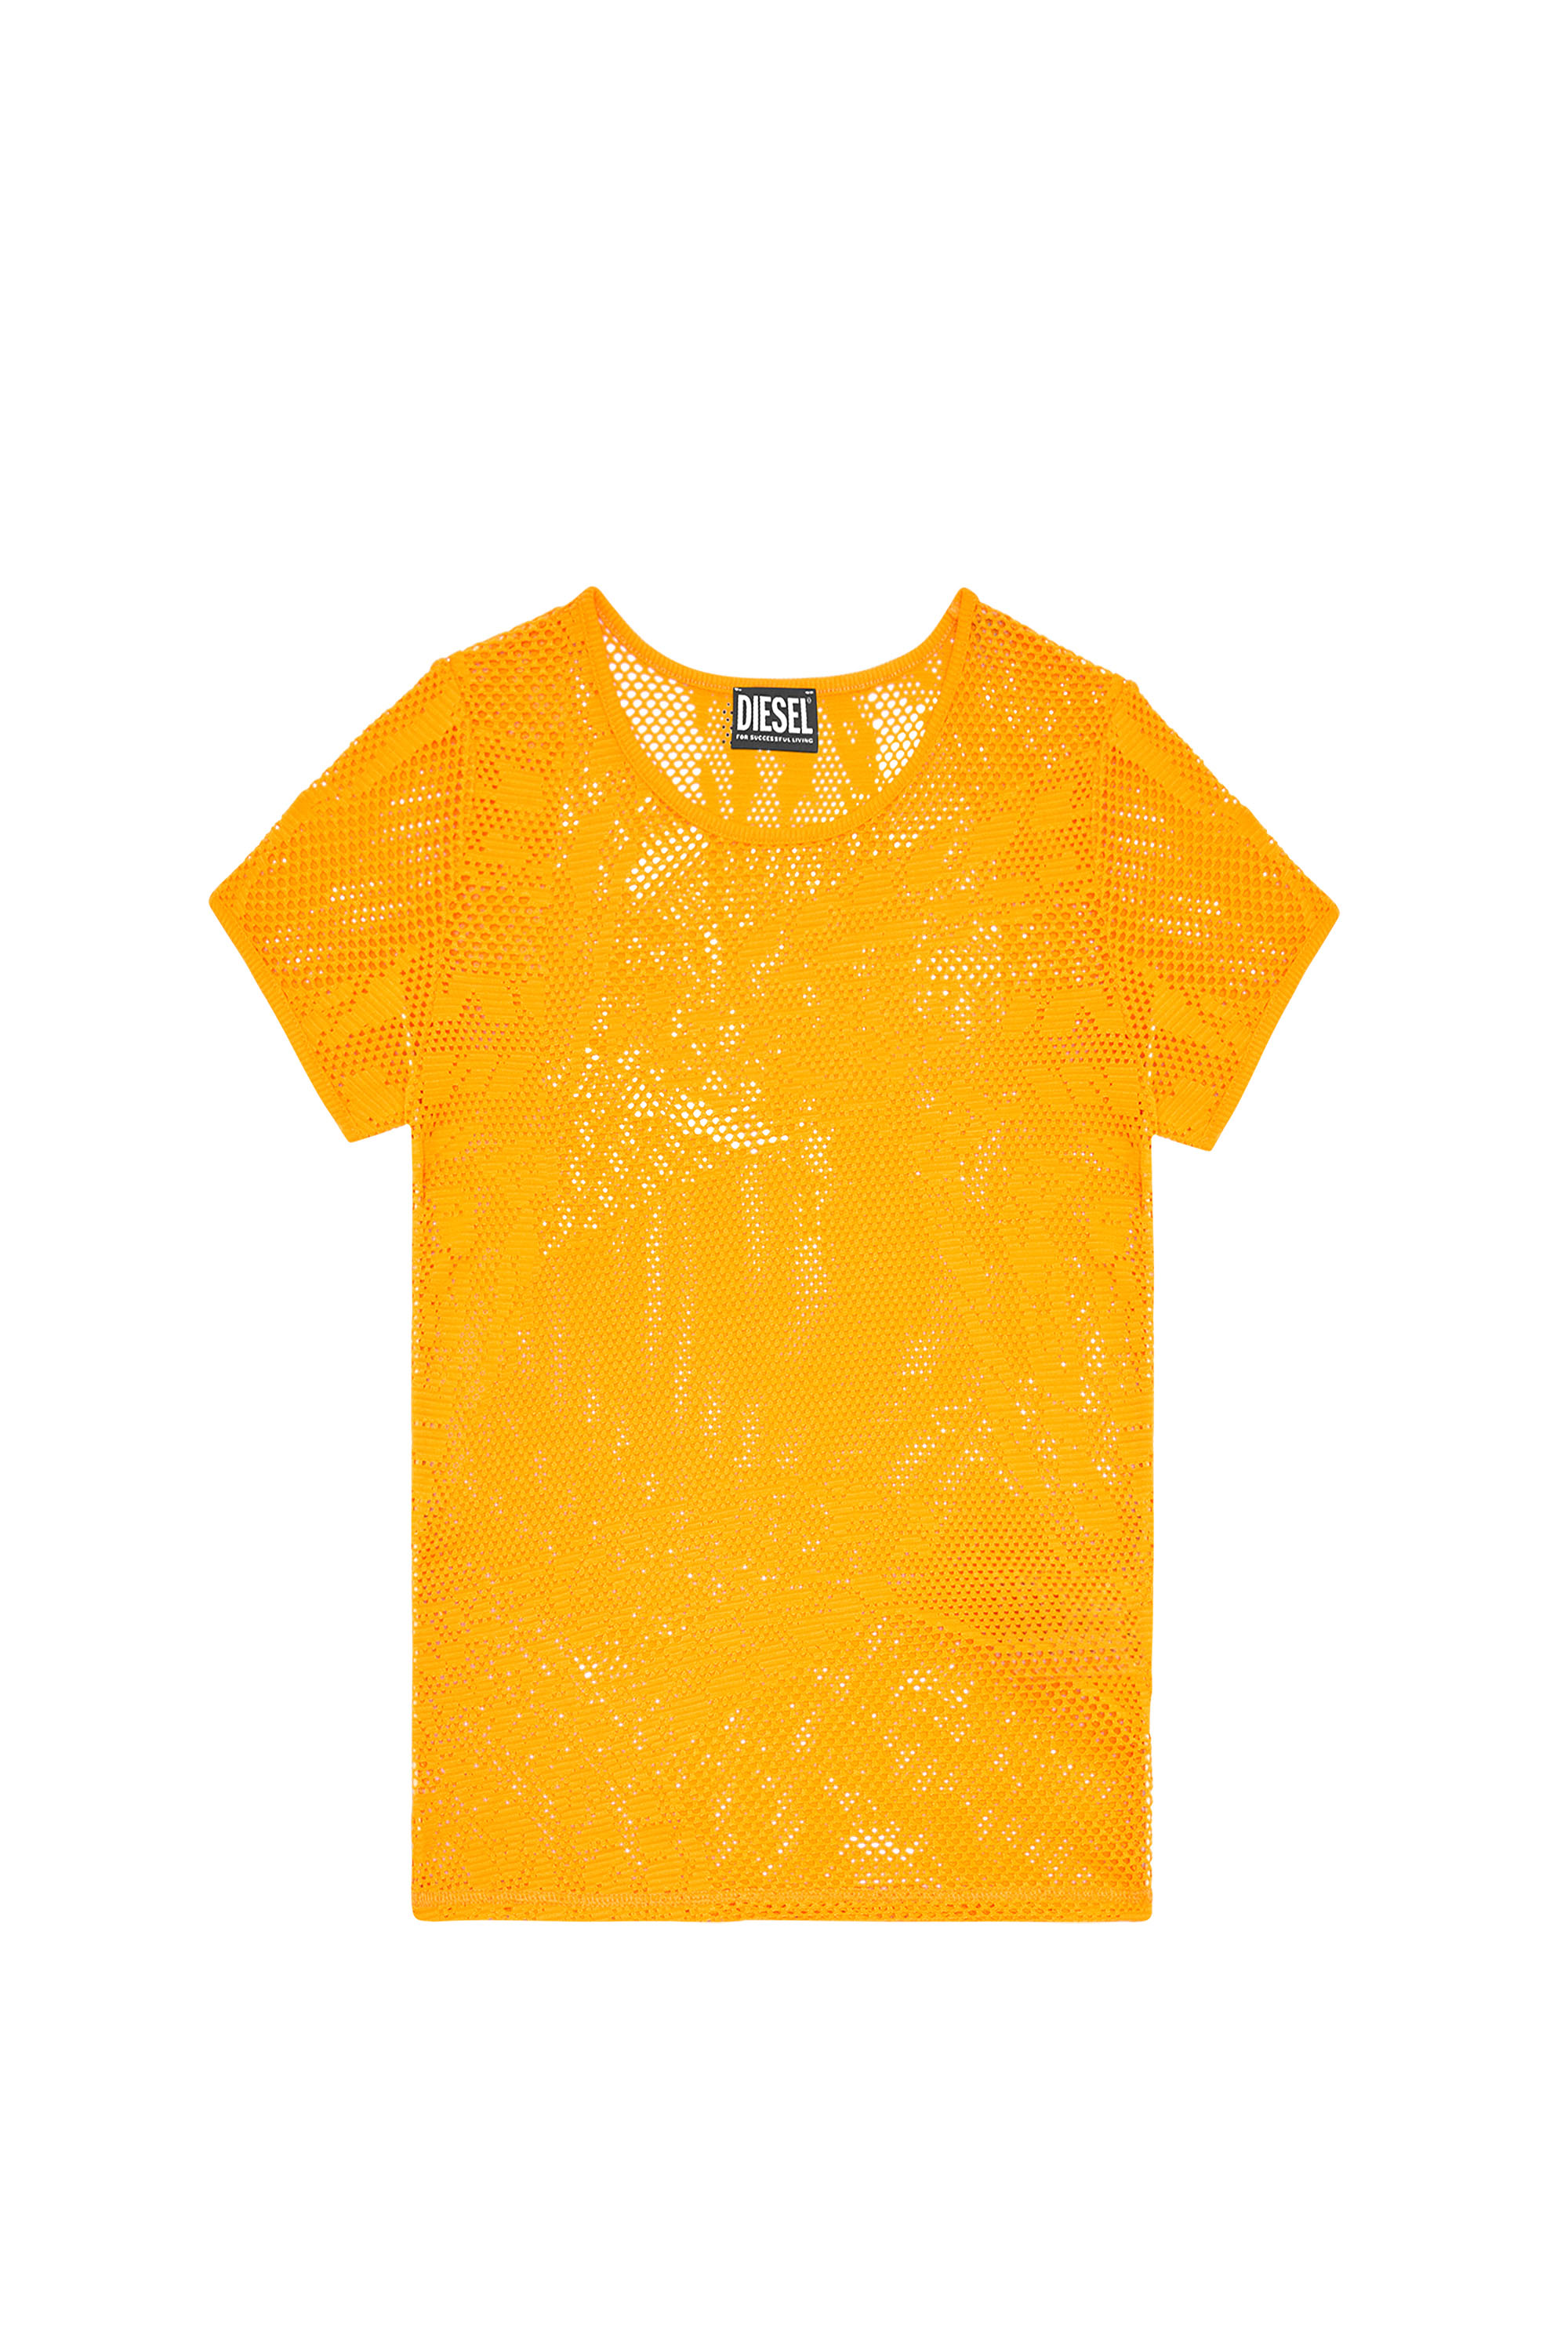 Diesel - T-JAQUE, Yellow - Image 5